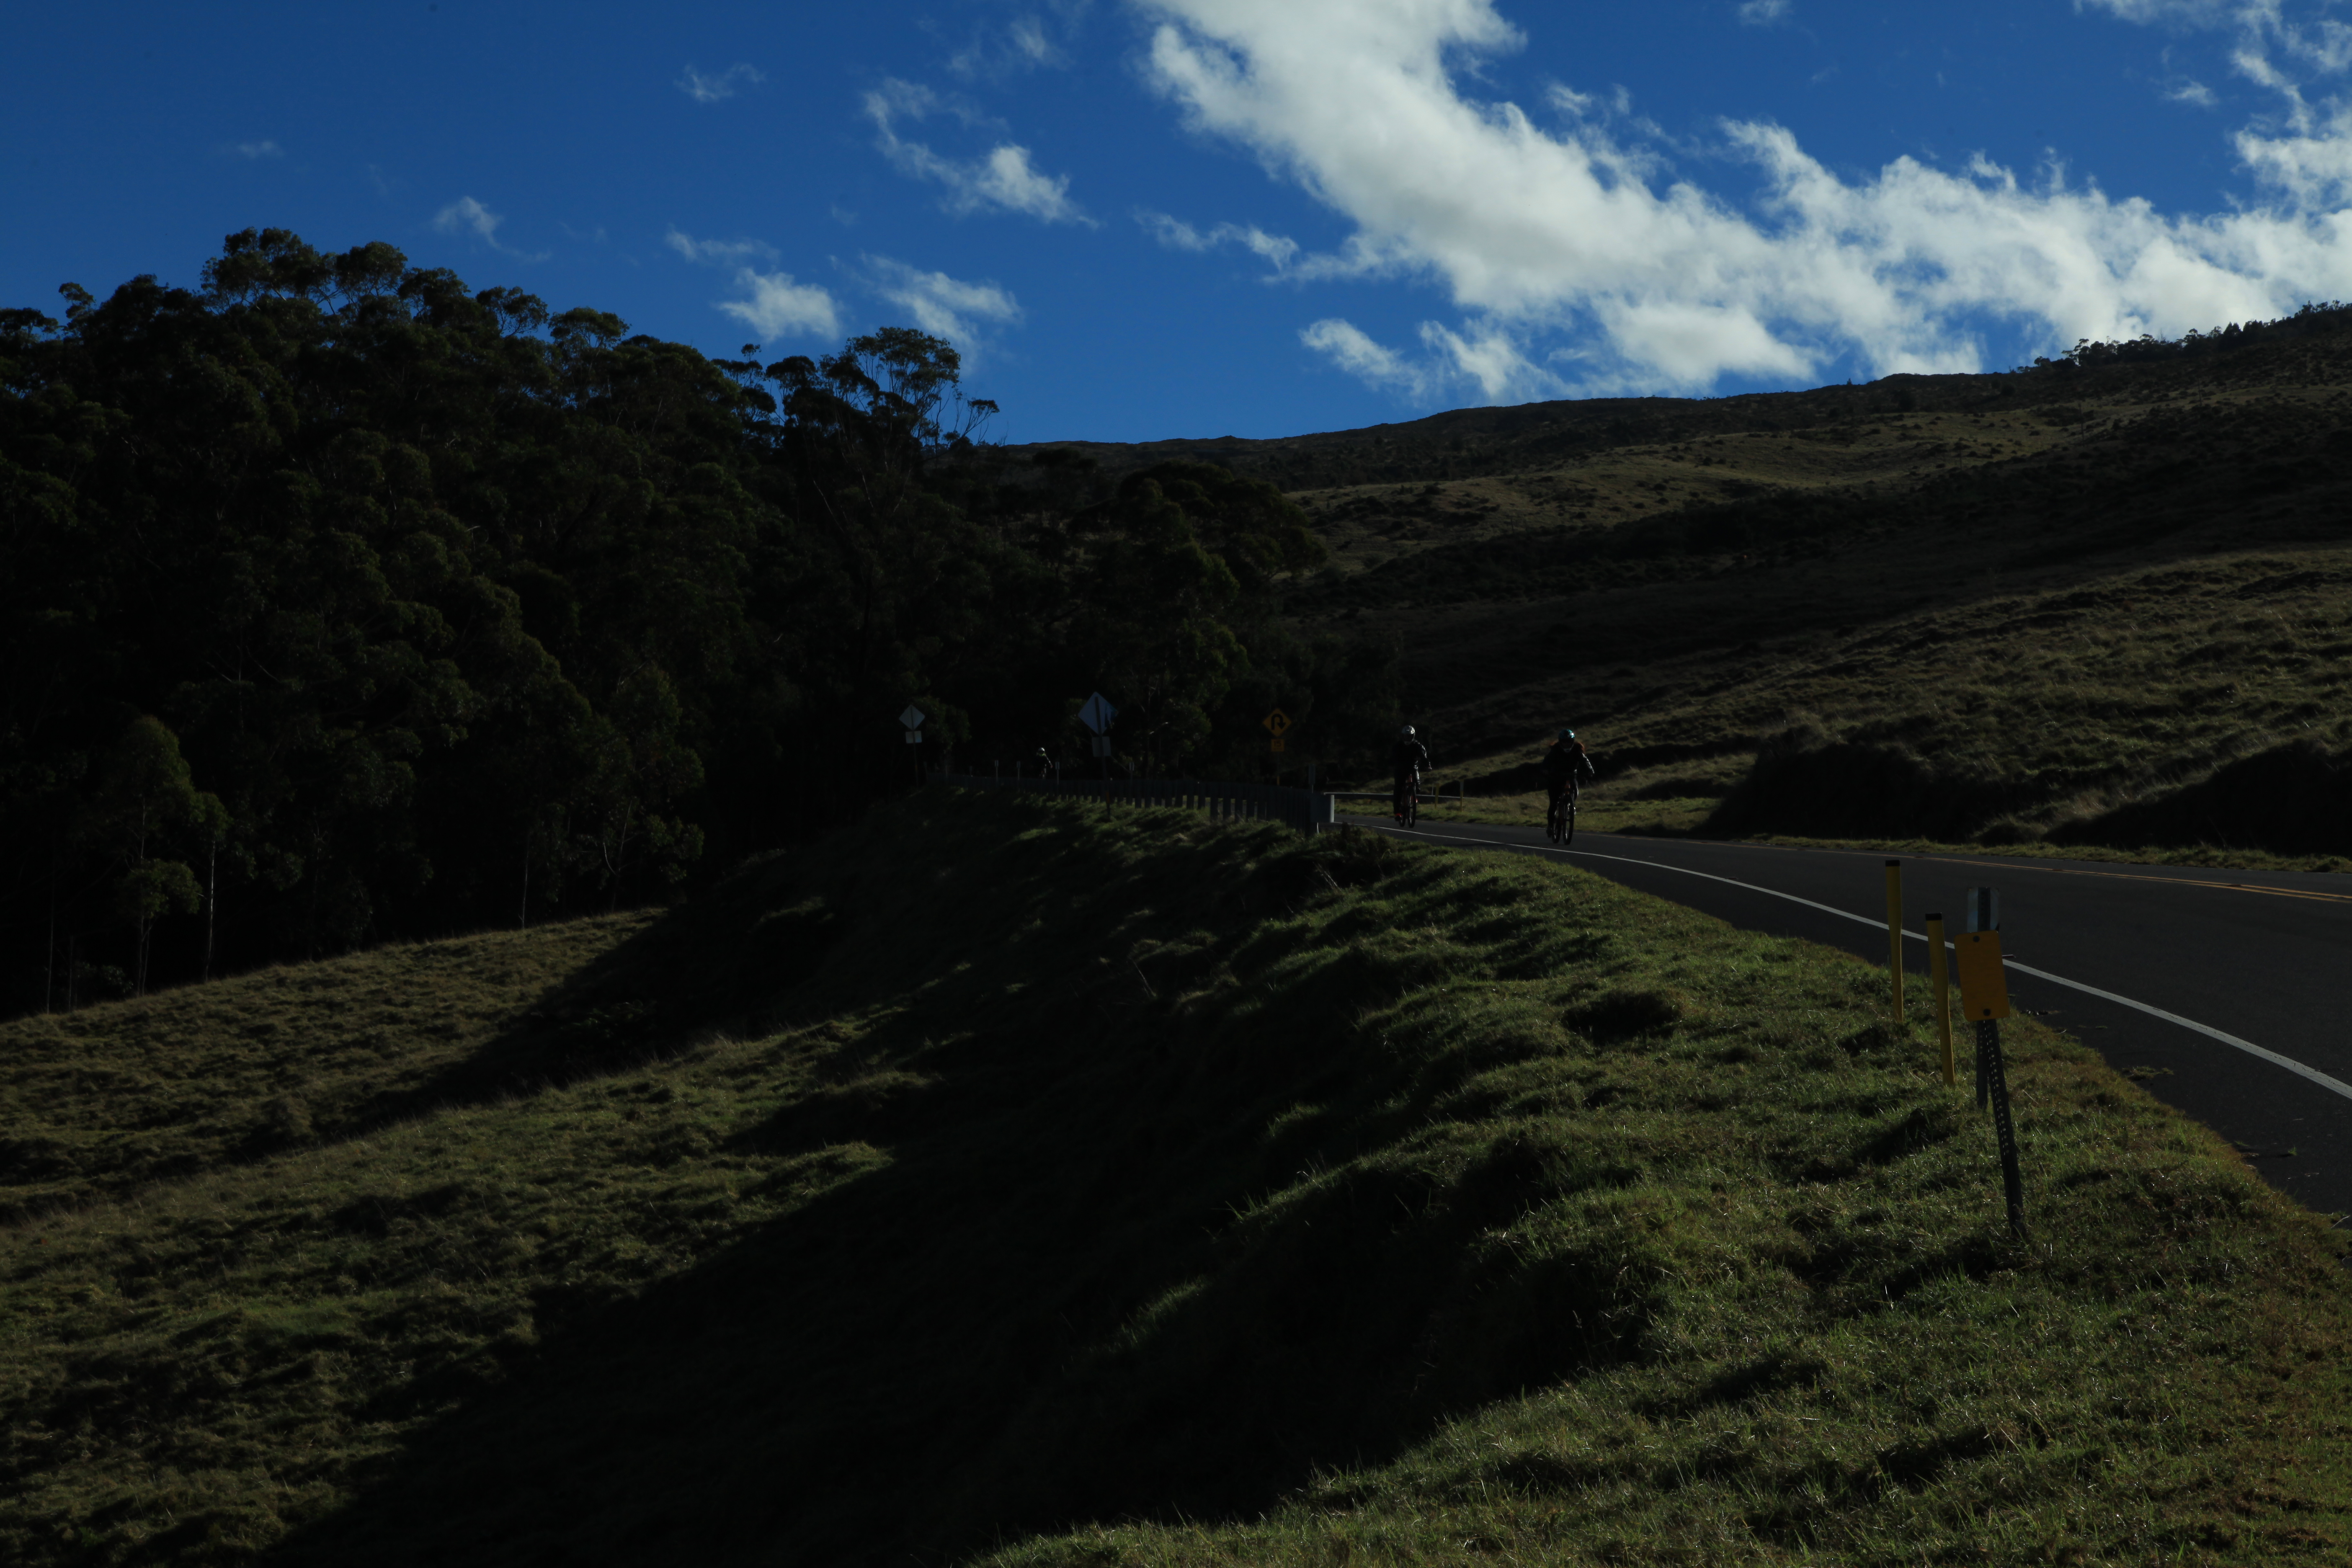 Experience a Multitude of Microclimates on the Maui Downhill Volcano Tour